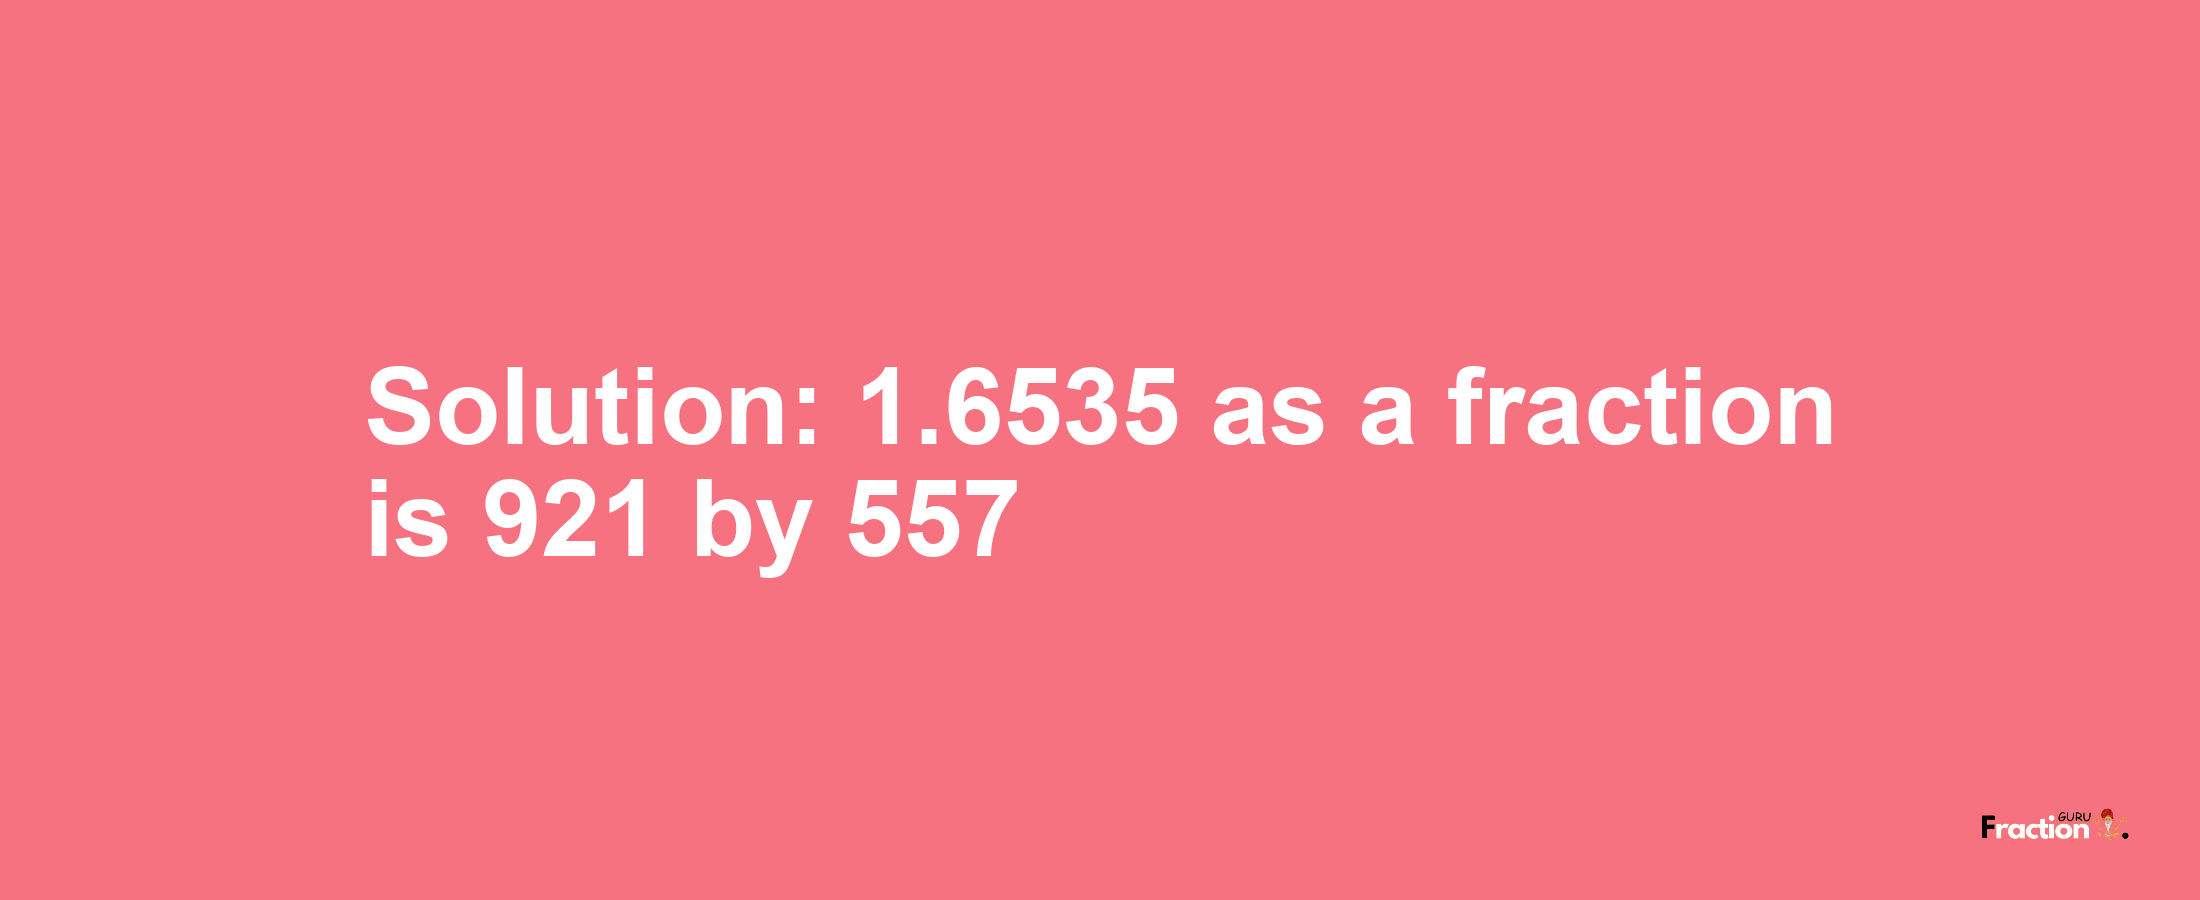 Solution:1.6535 as a fraction is 921/557